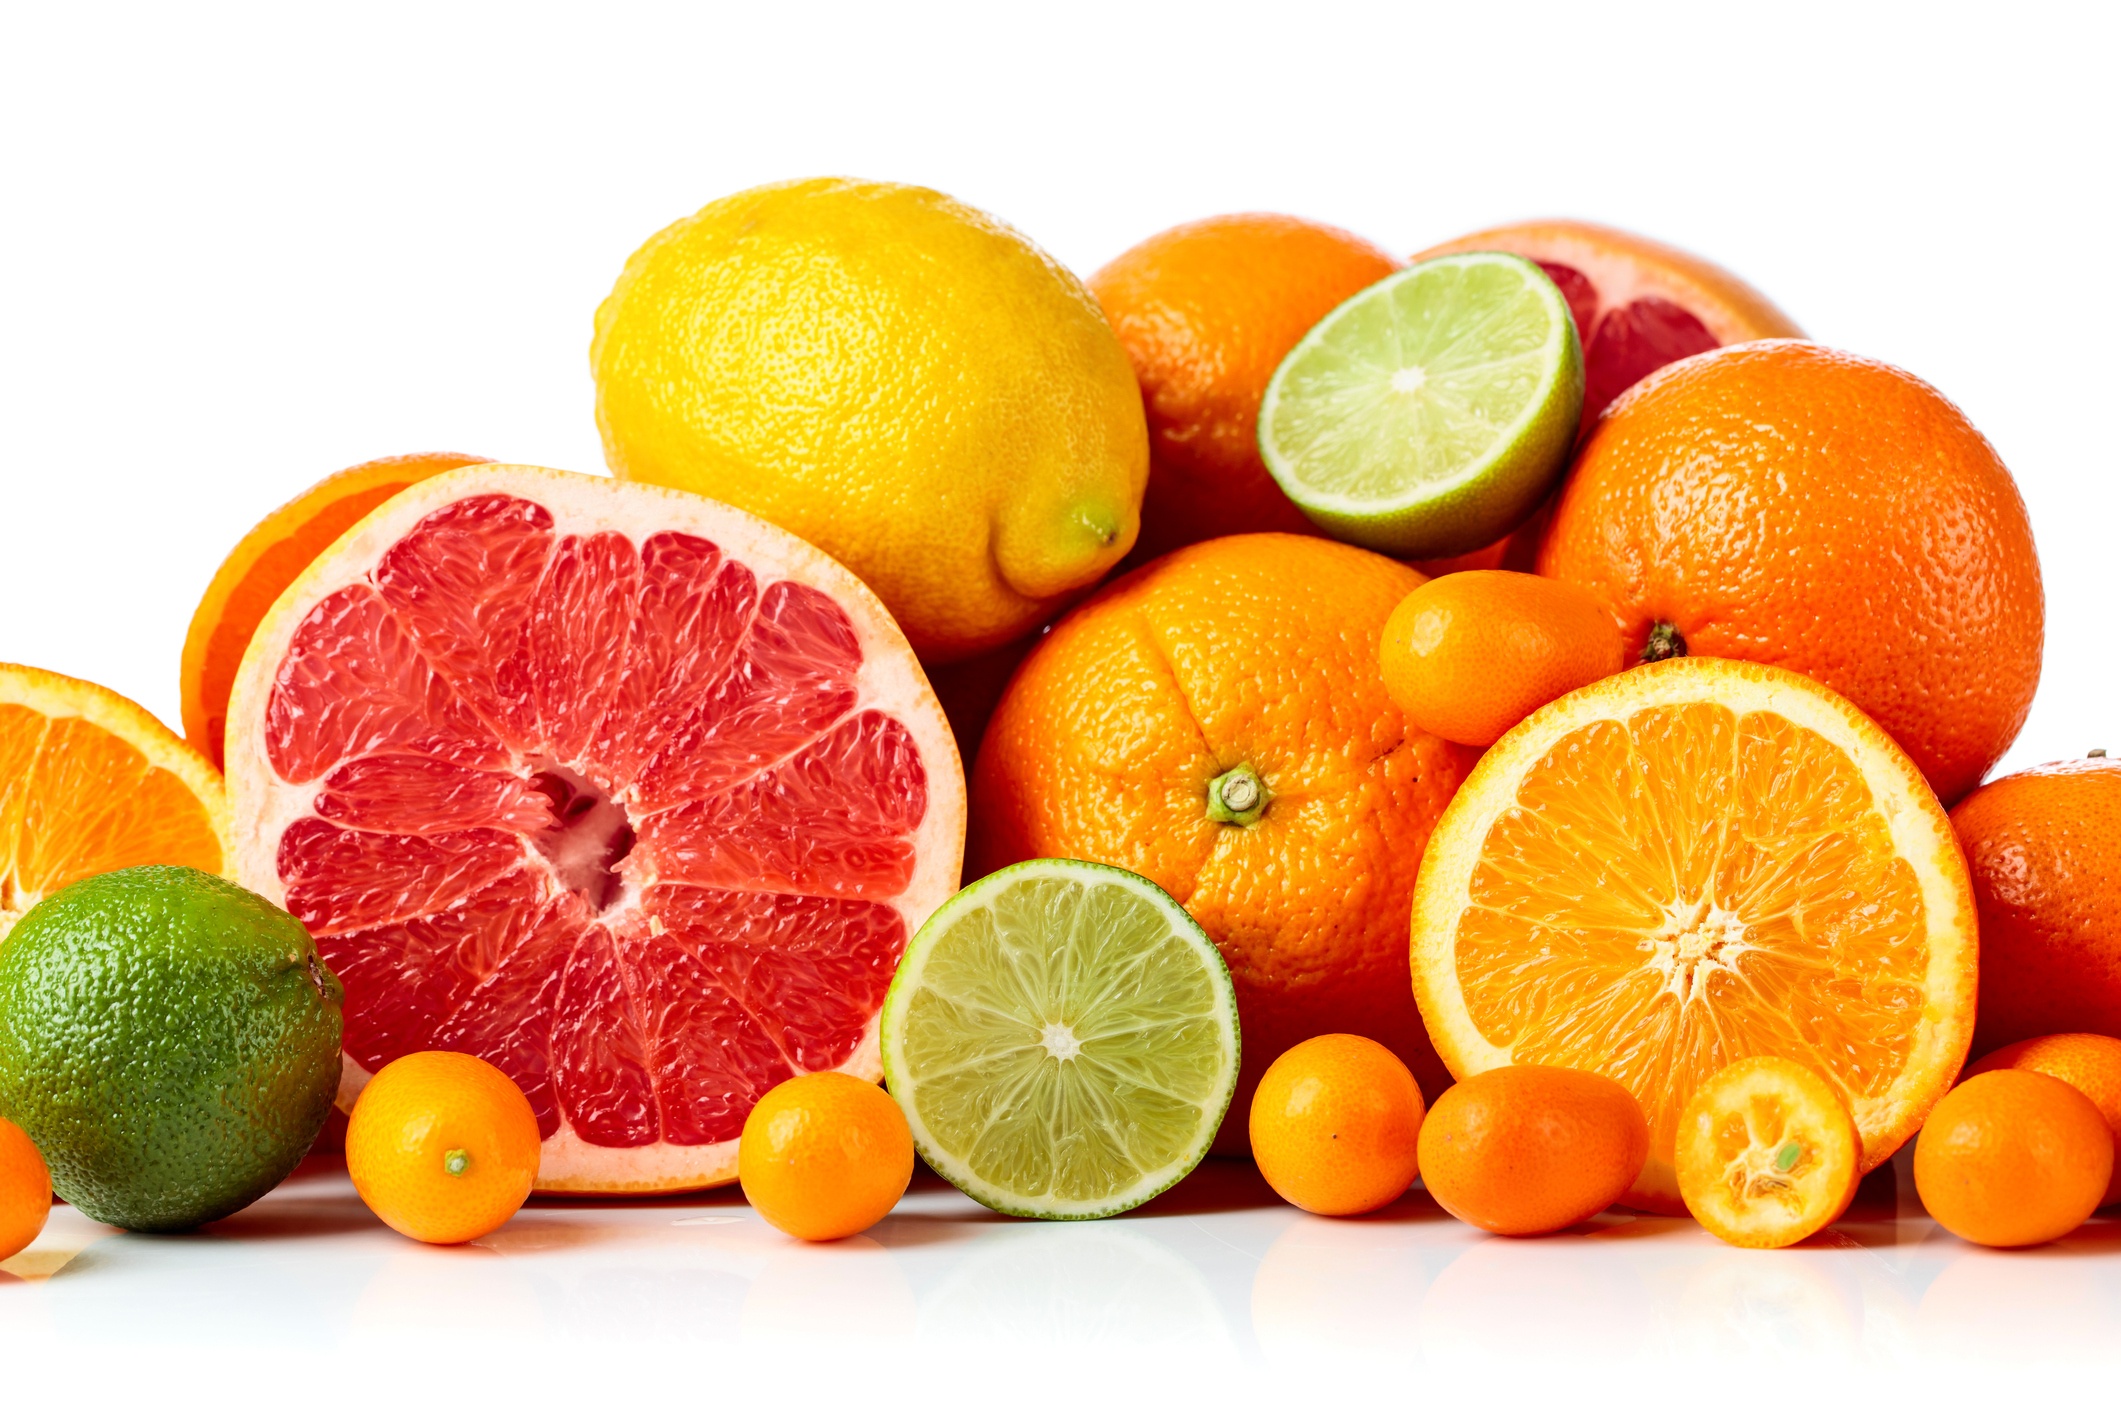 HOW CITRUSES COULD REDUCE CANCER RISK